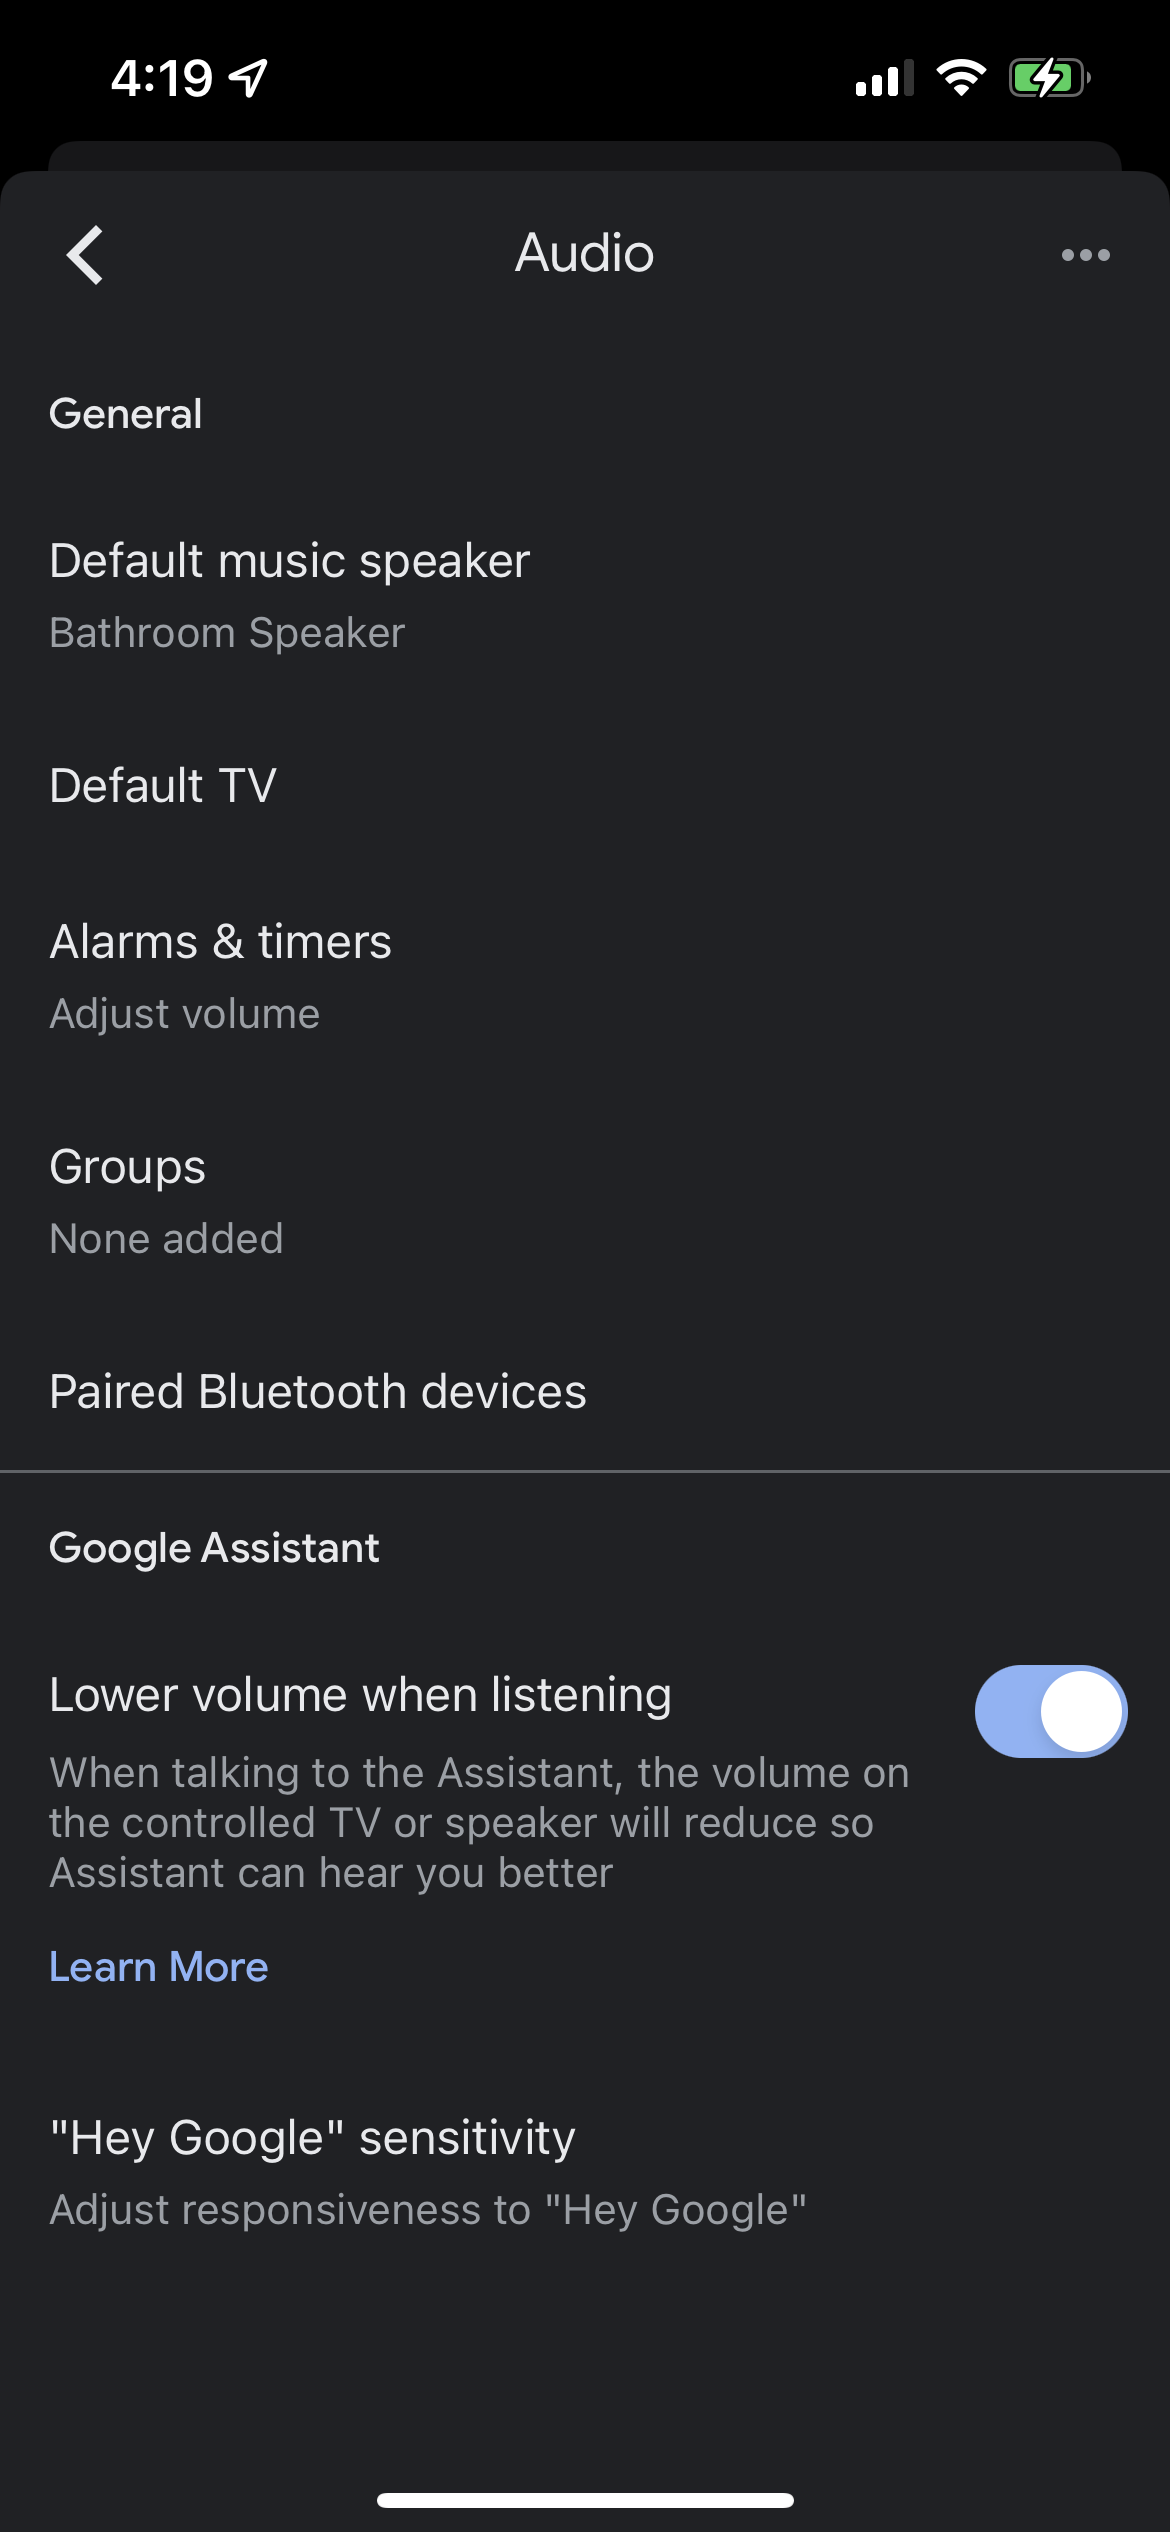 Audio settings in the Google Home app